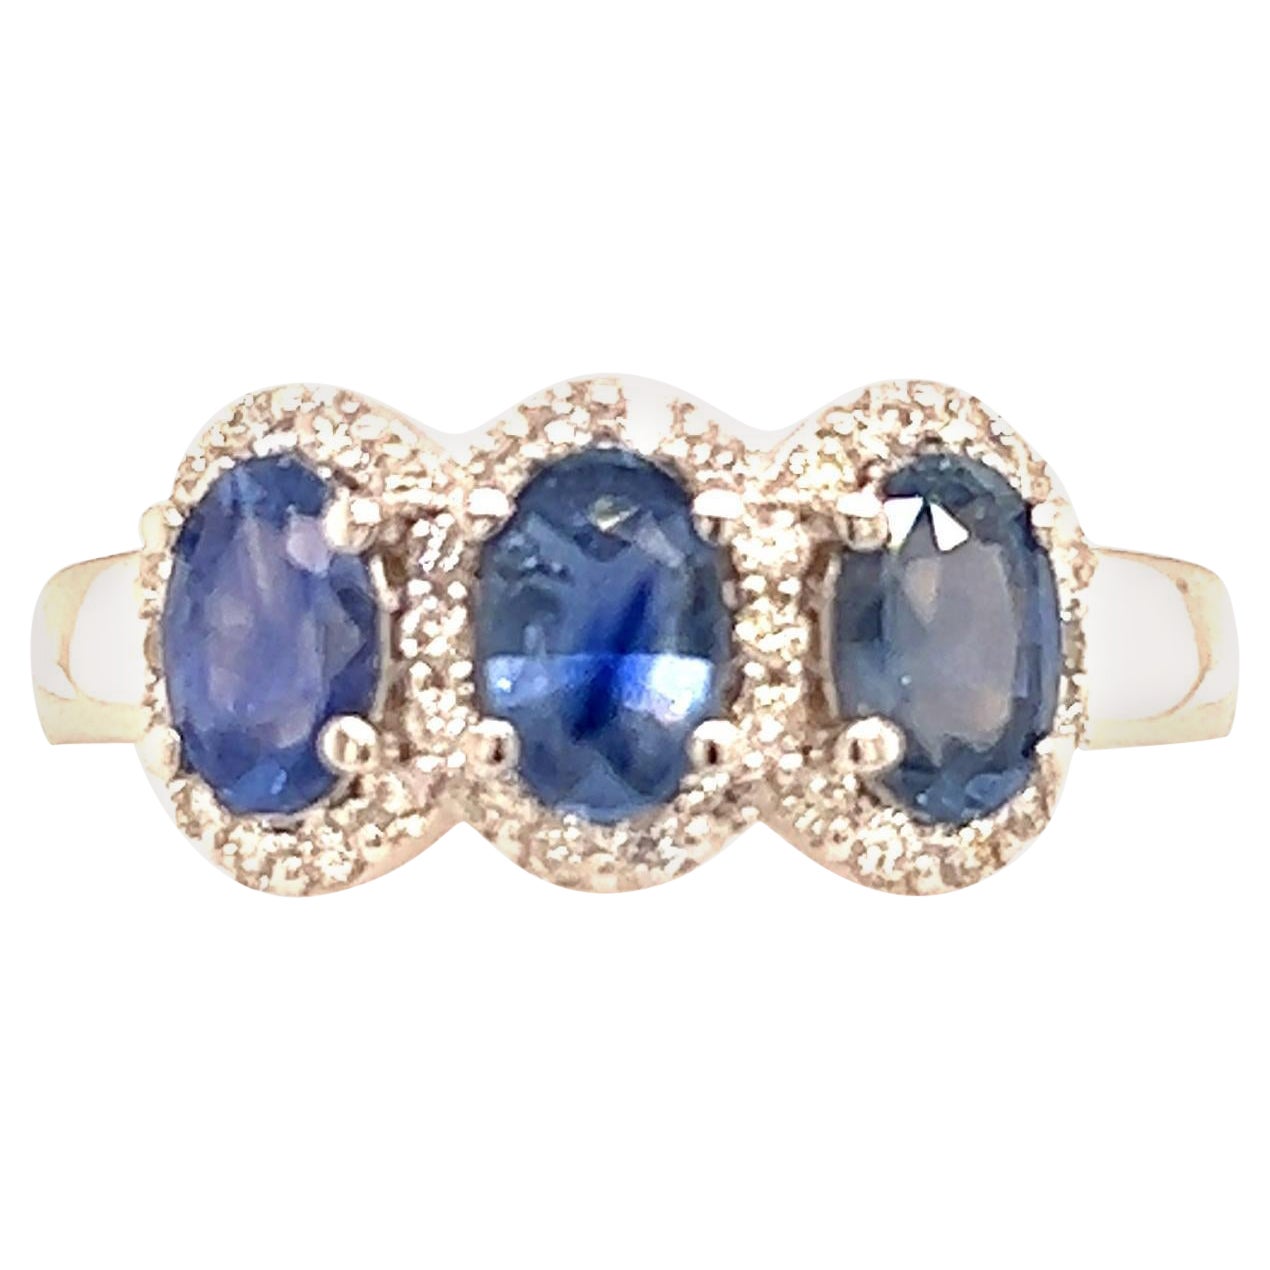 Natural Sapphire Diamond Ring 7 14k W Gold 1.67 TCW Certified